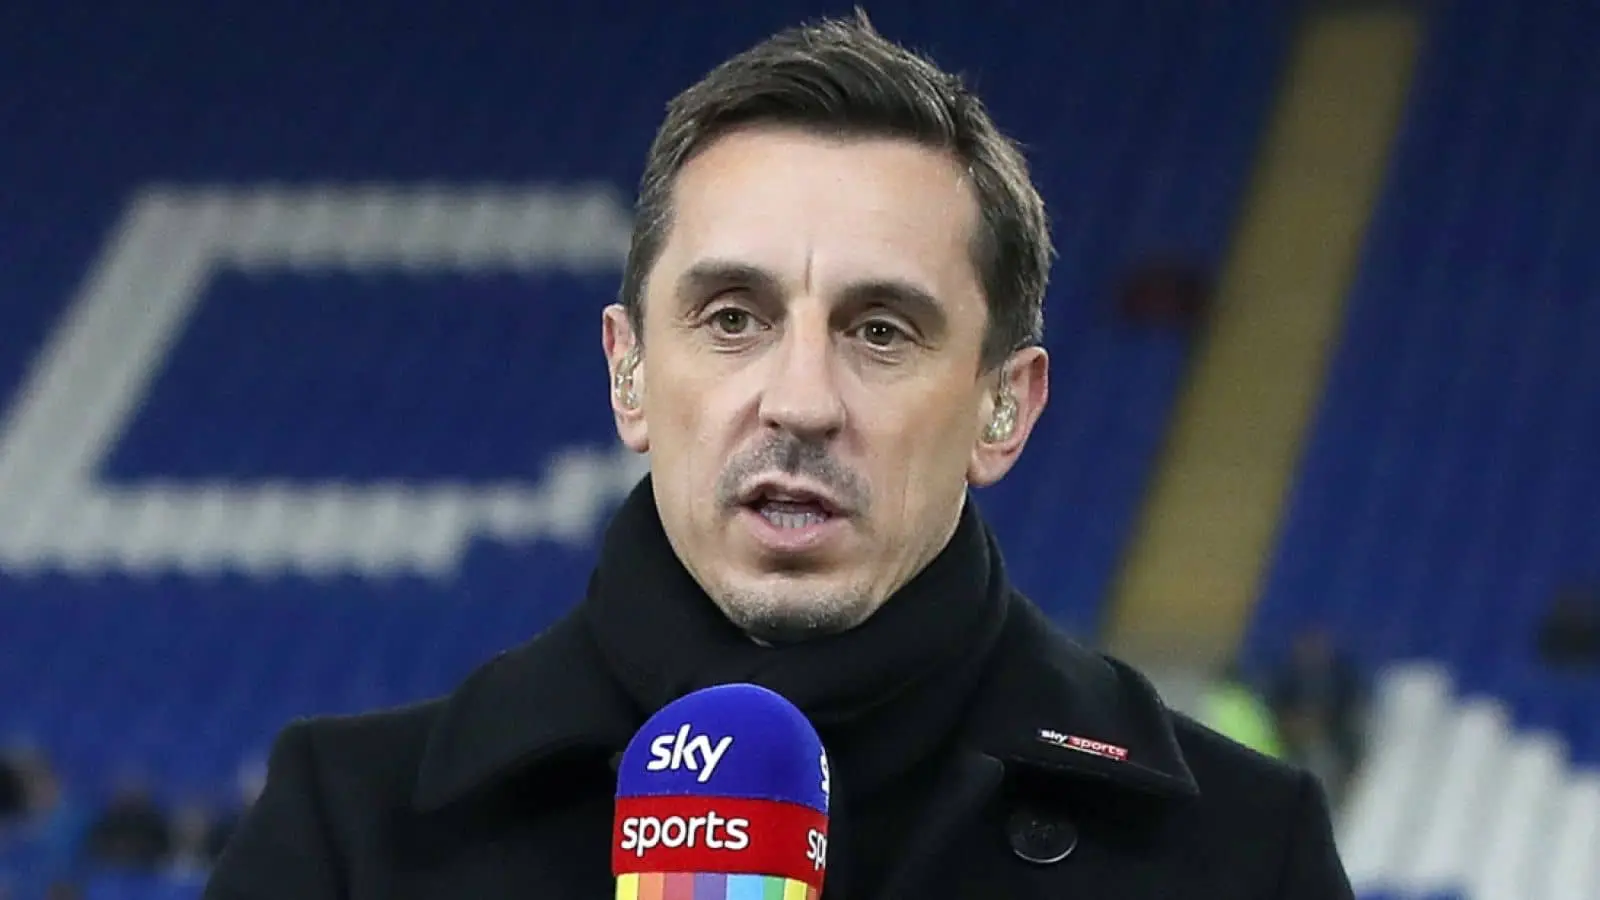 EPL: It would be madness for Chelsea to sack Pochettino – Gary Neville